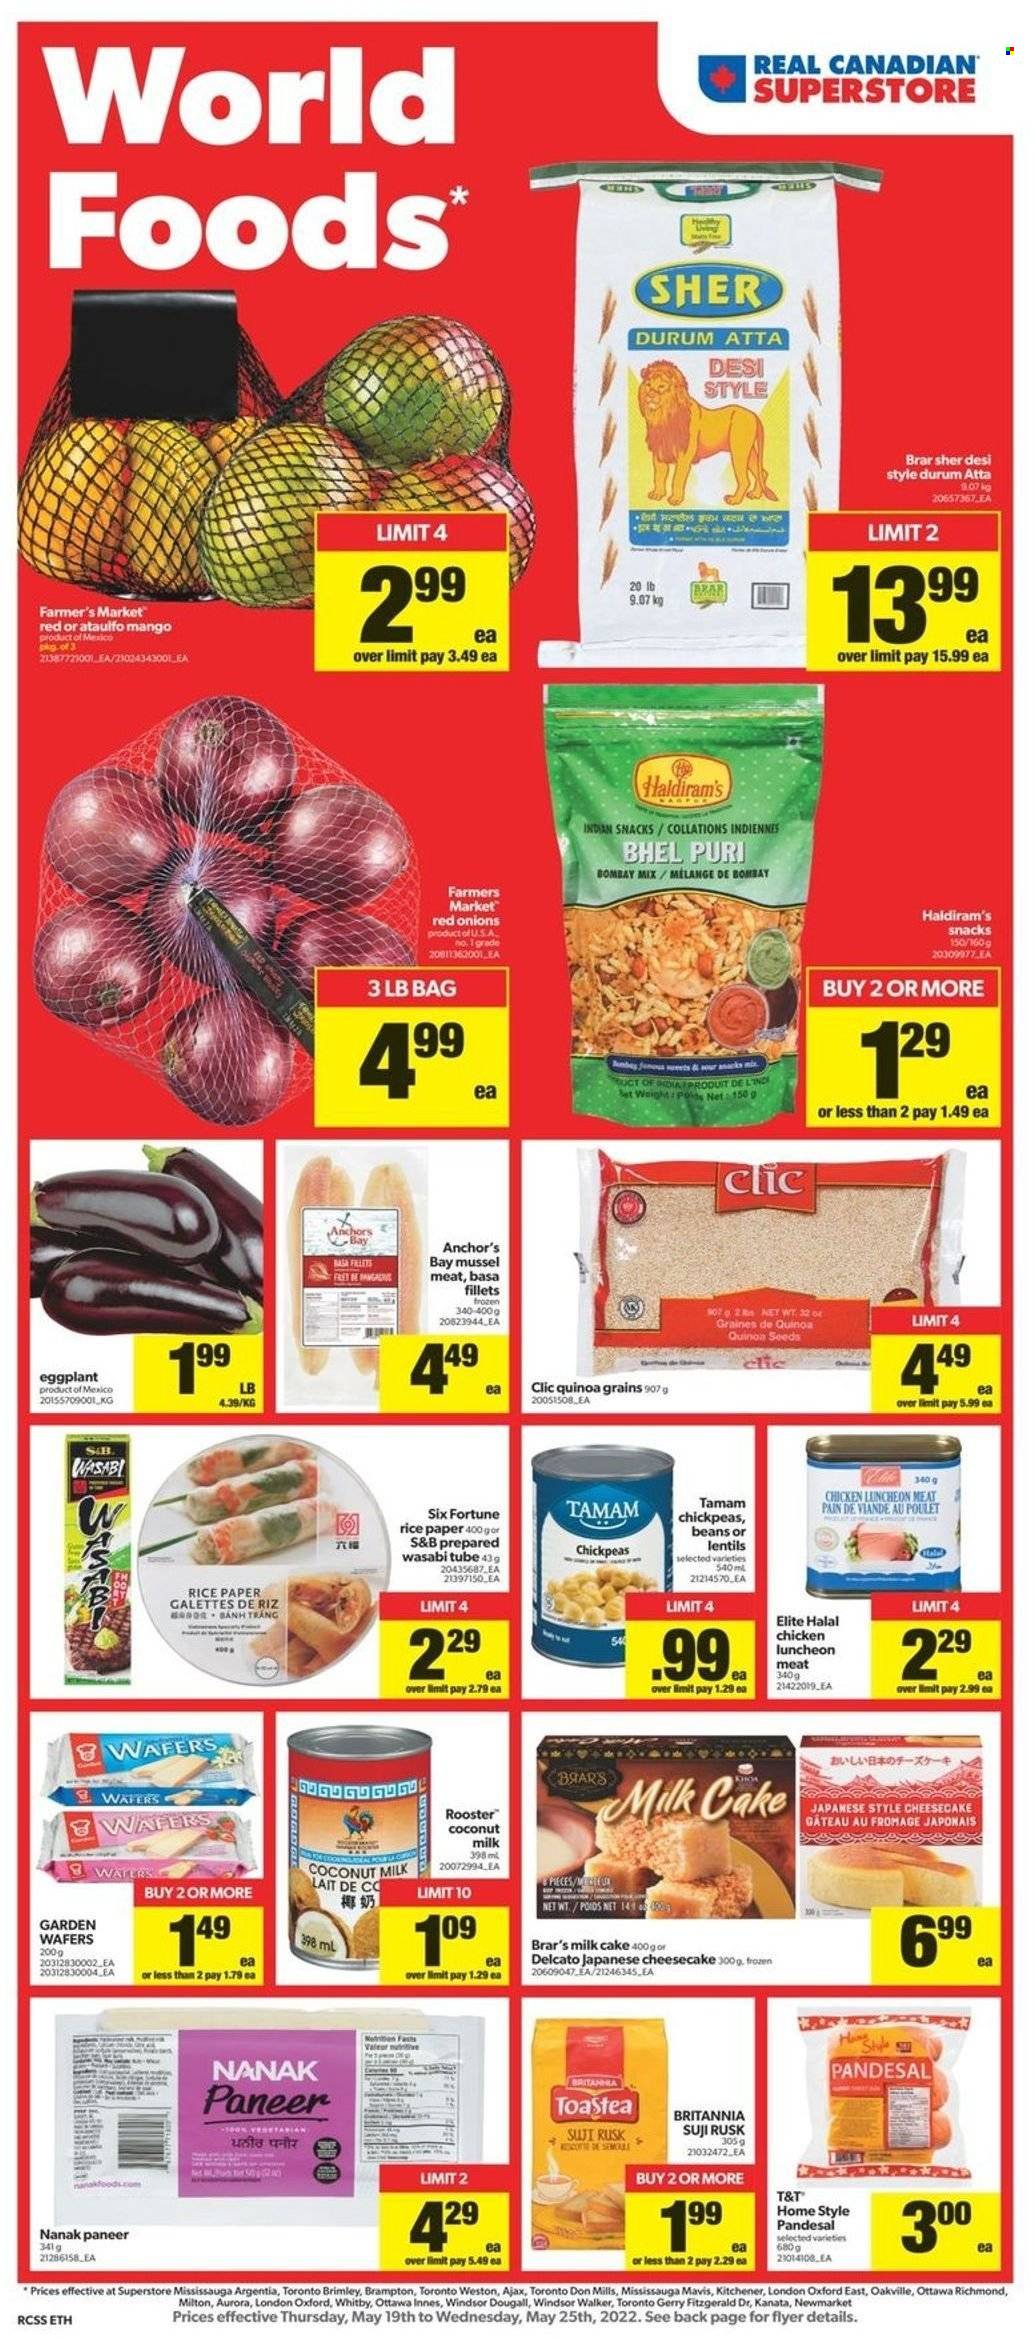 Real Canadian Superstore flyer  - May 19, 2022 - May 25, 2022.